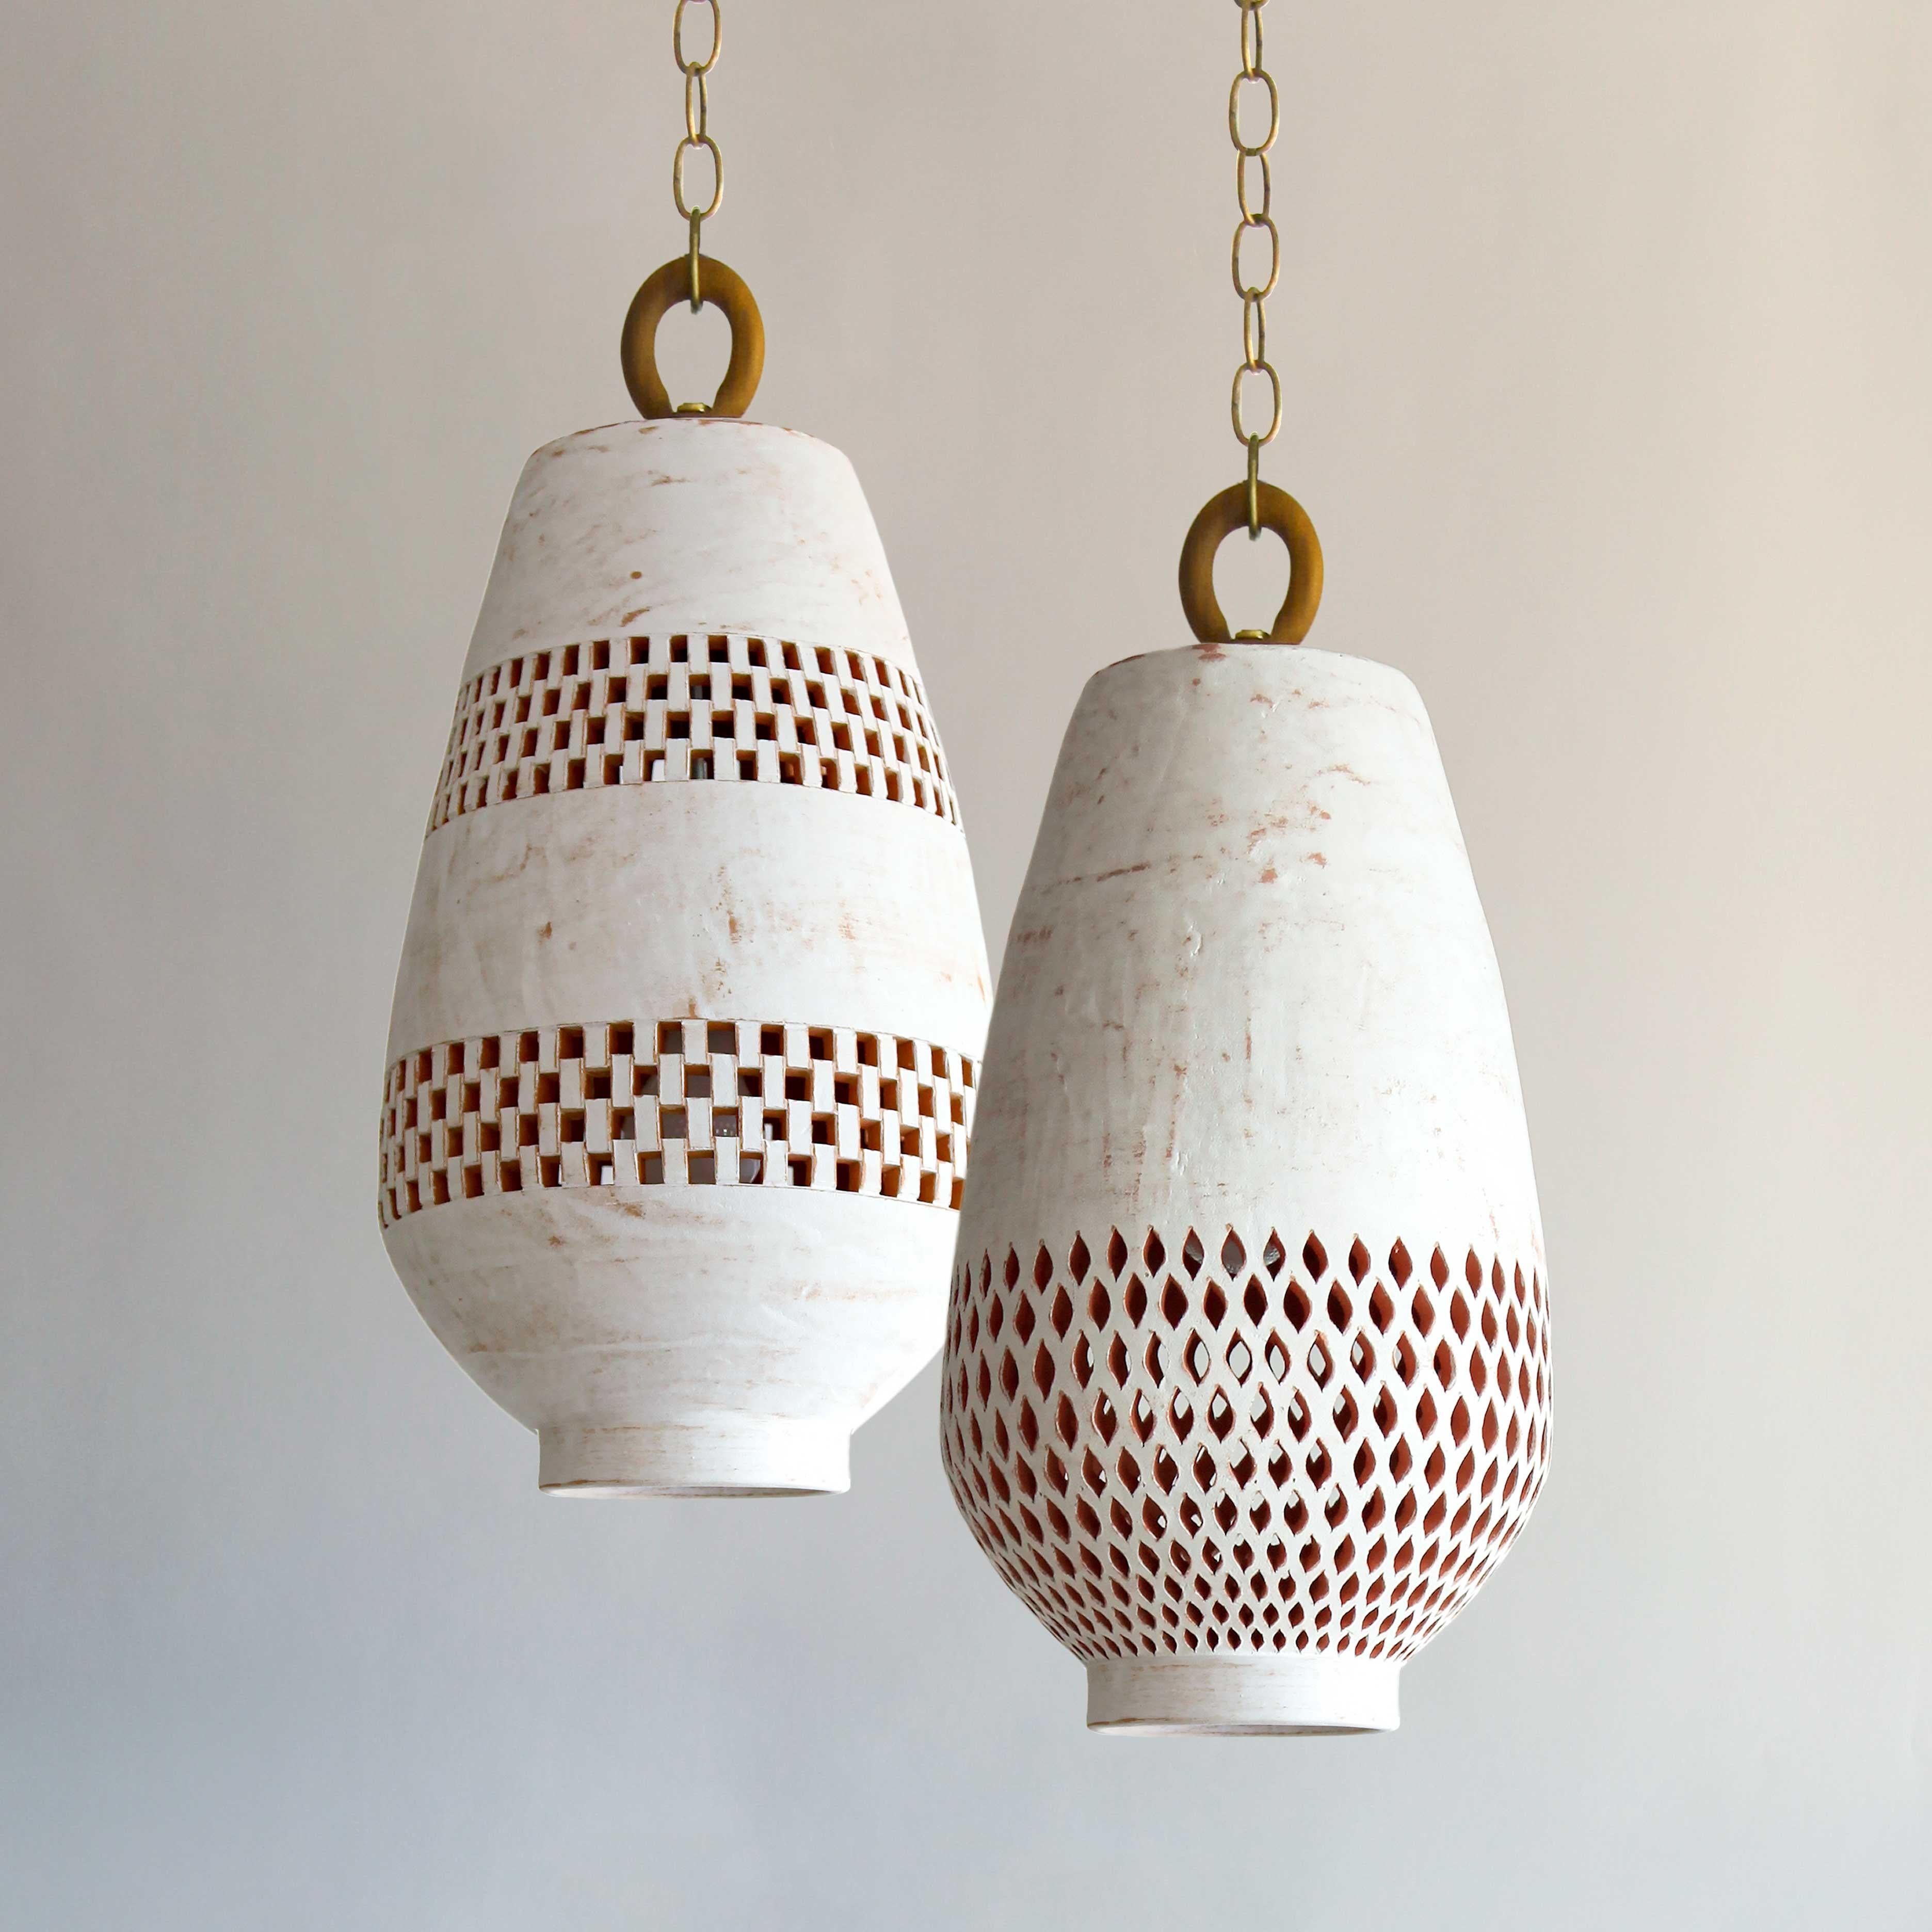 Hand-Crafted White Ceramic Pendant Light XL, Natural Brass, Ajedrez Atzompa Collection For Sale